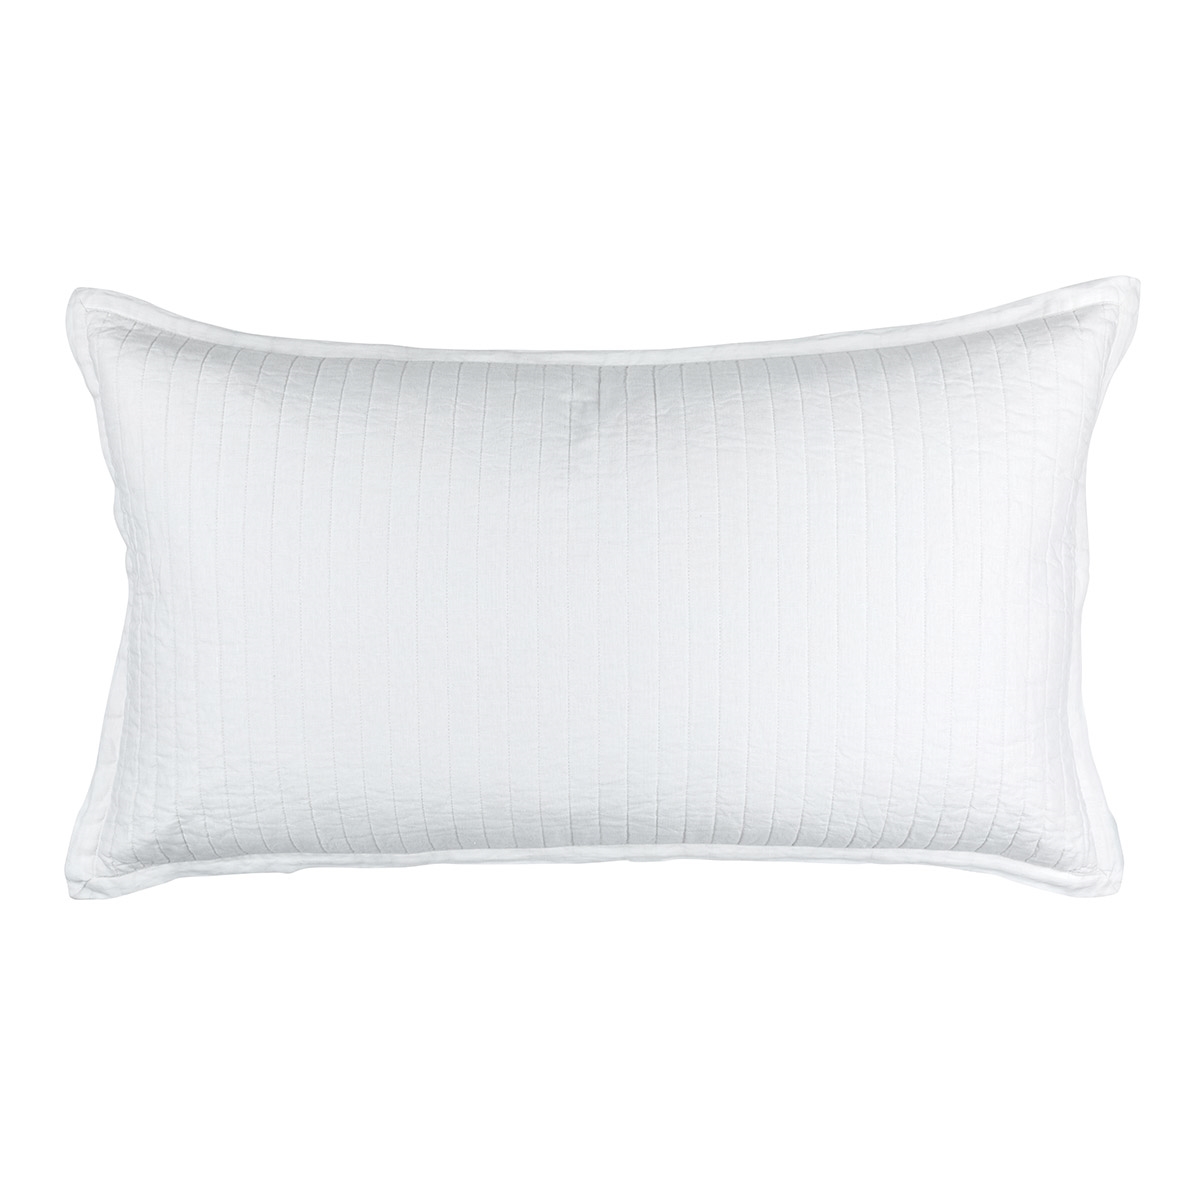 Tessa Quilted King Pillow White Linen 20x36 (Insert Included) by Lili ...